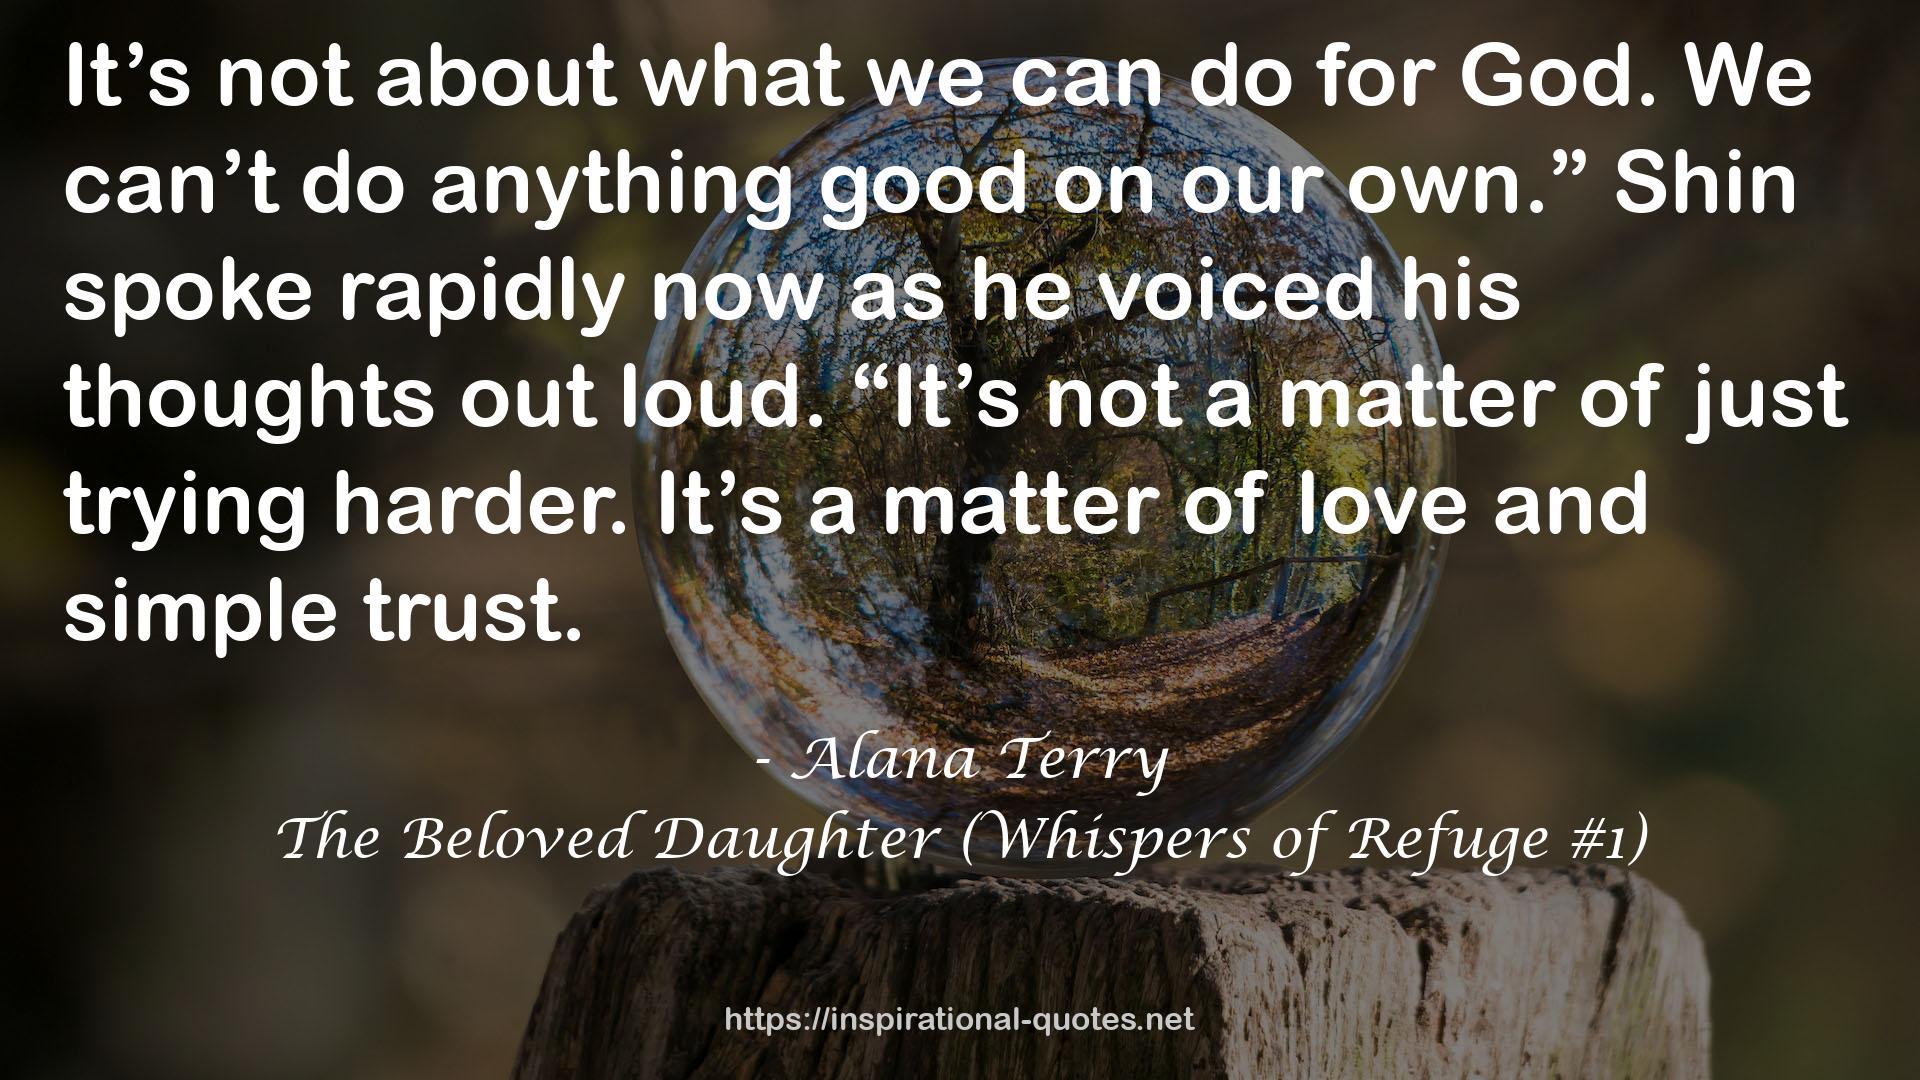 The Beloved Daughter (Whispers of Refuge #1) QUOTES